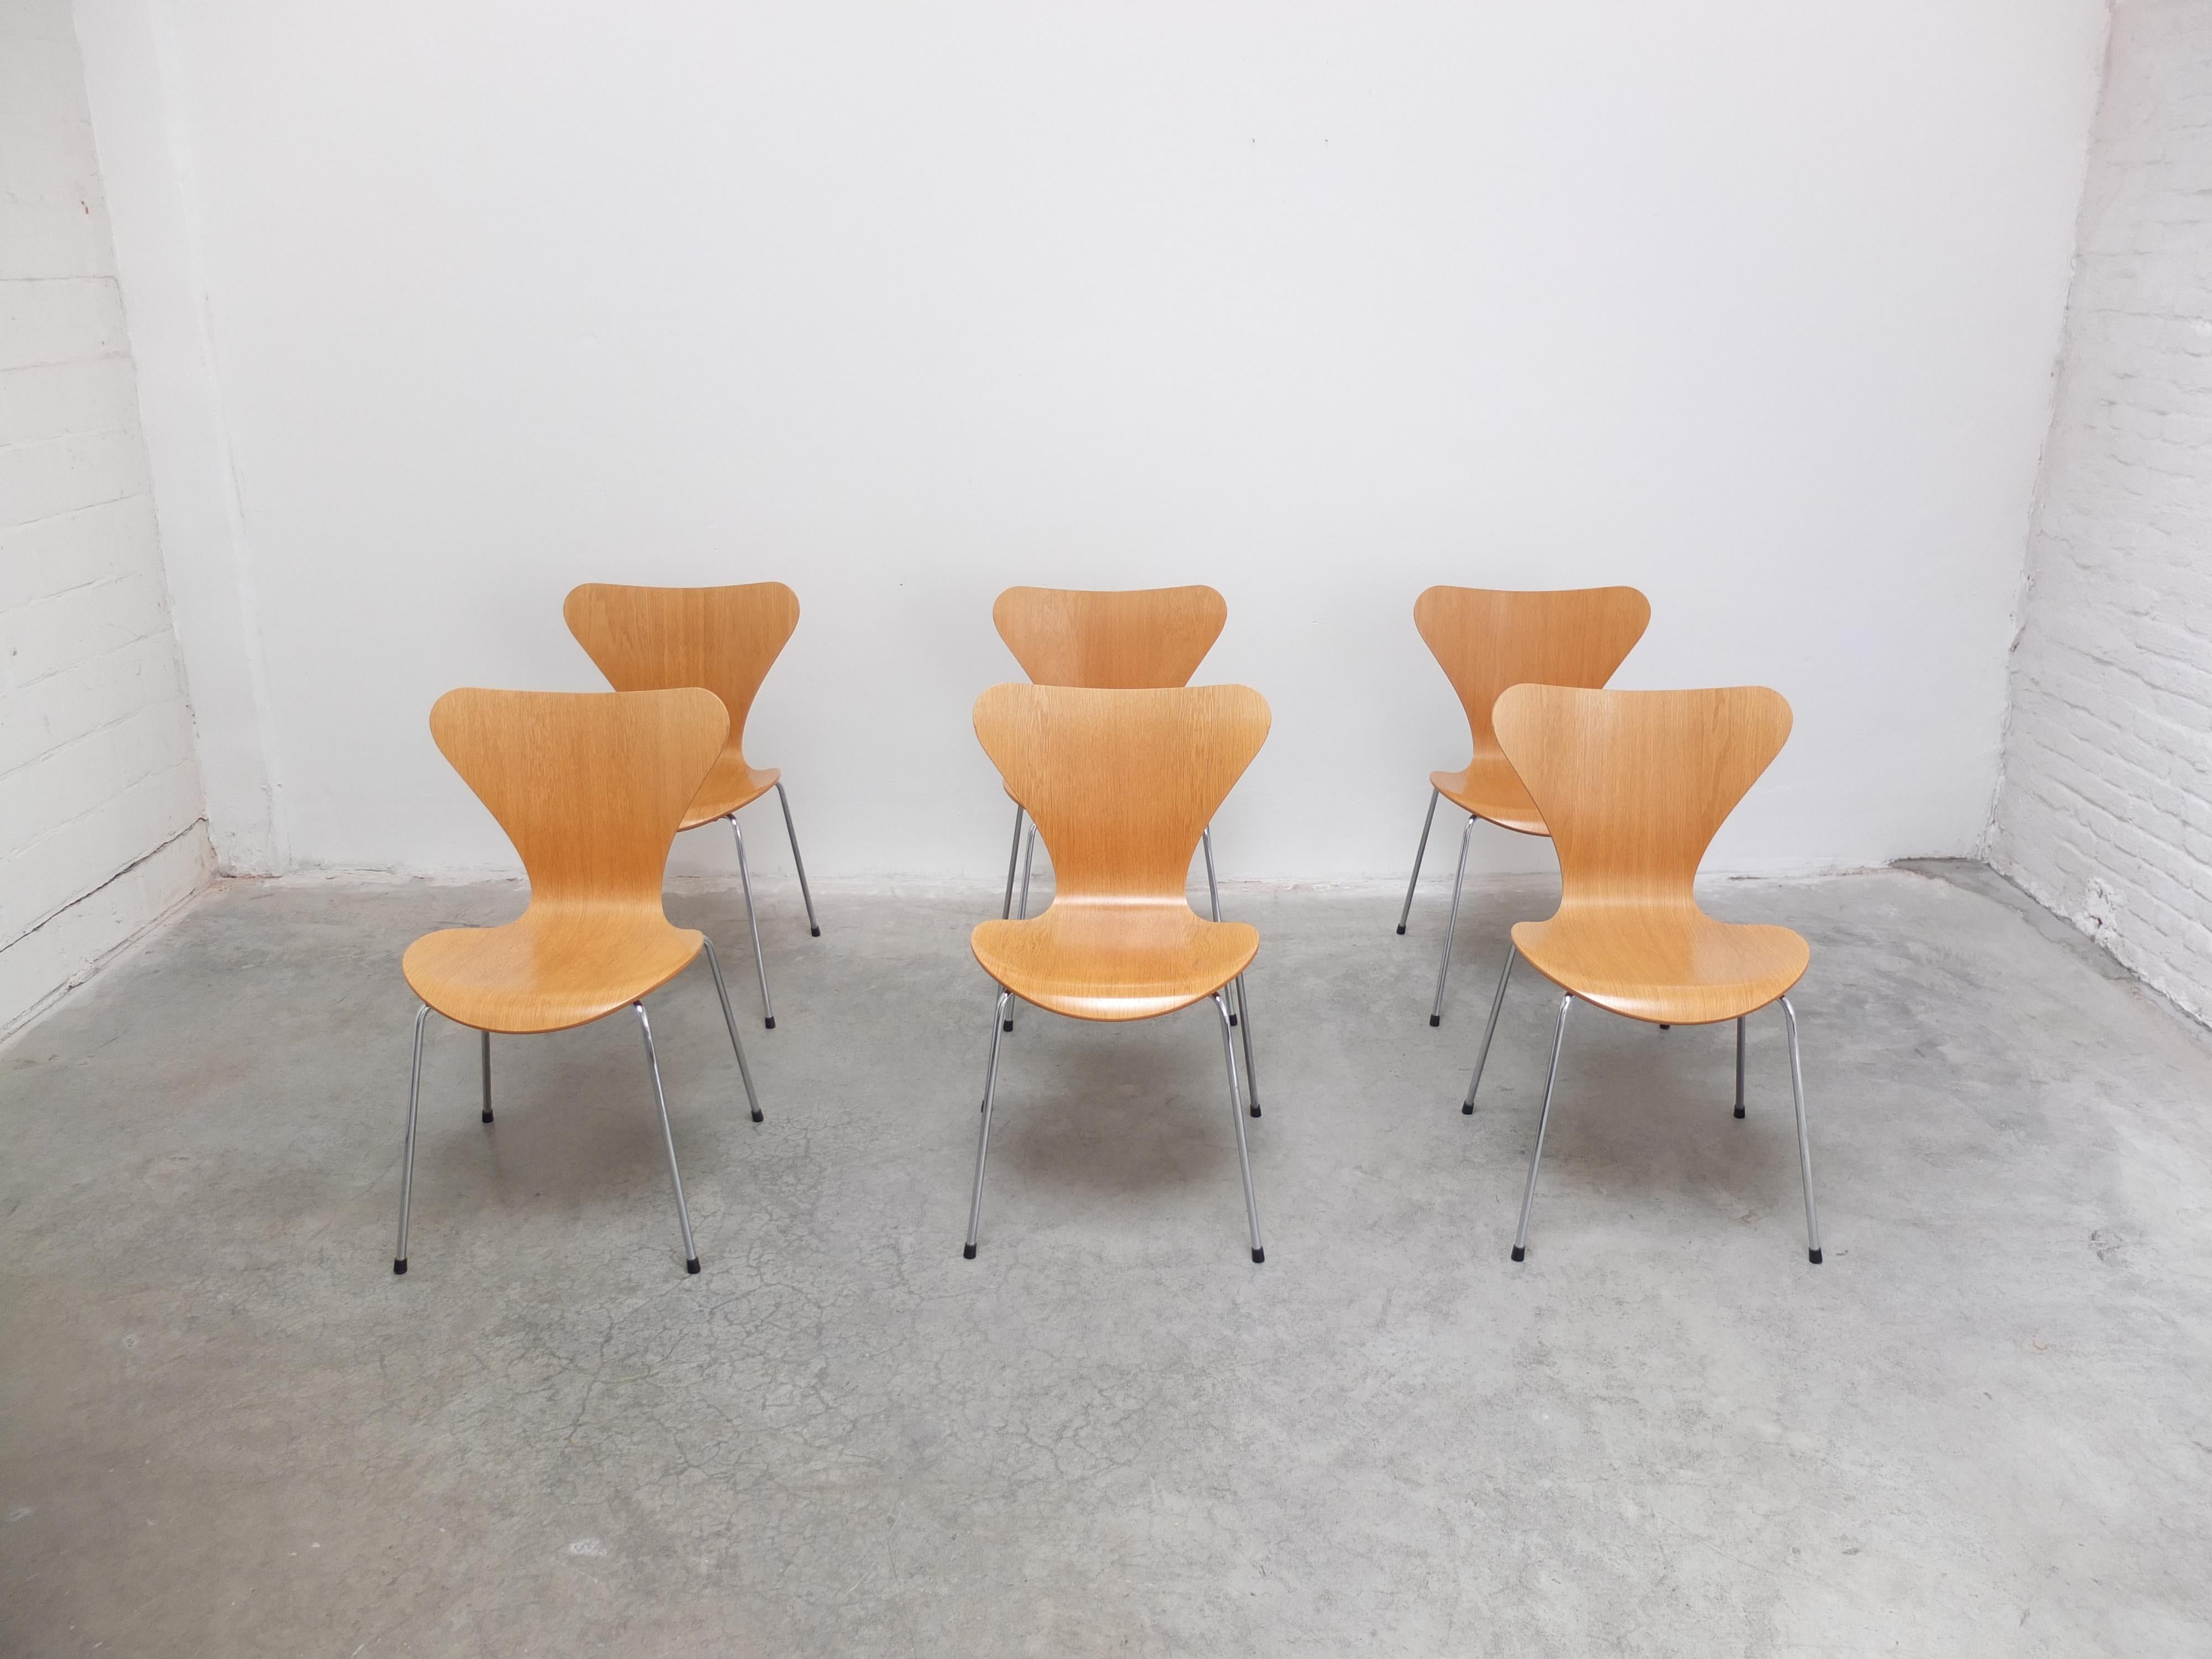 Great set of 6 ‘Series 7’ dining chairs designed by Arne Jacobsen in 1955. These examples are made of beautiful warm oak wood. In good condition with some minor traces of use as seen on the pictures. Produced in Denmark by Fritz Hansen in 1993